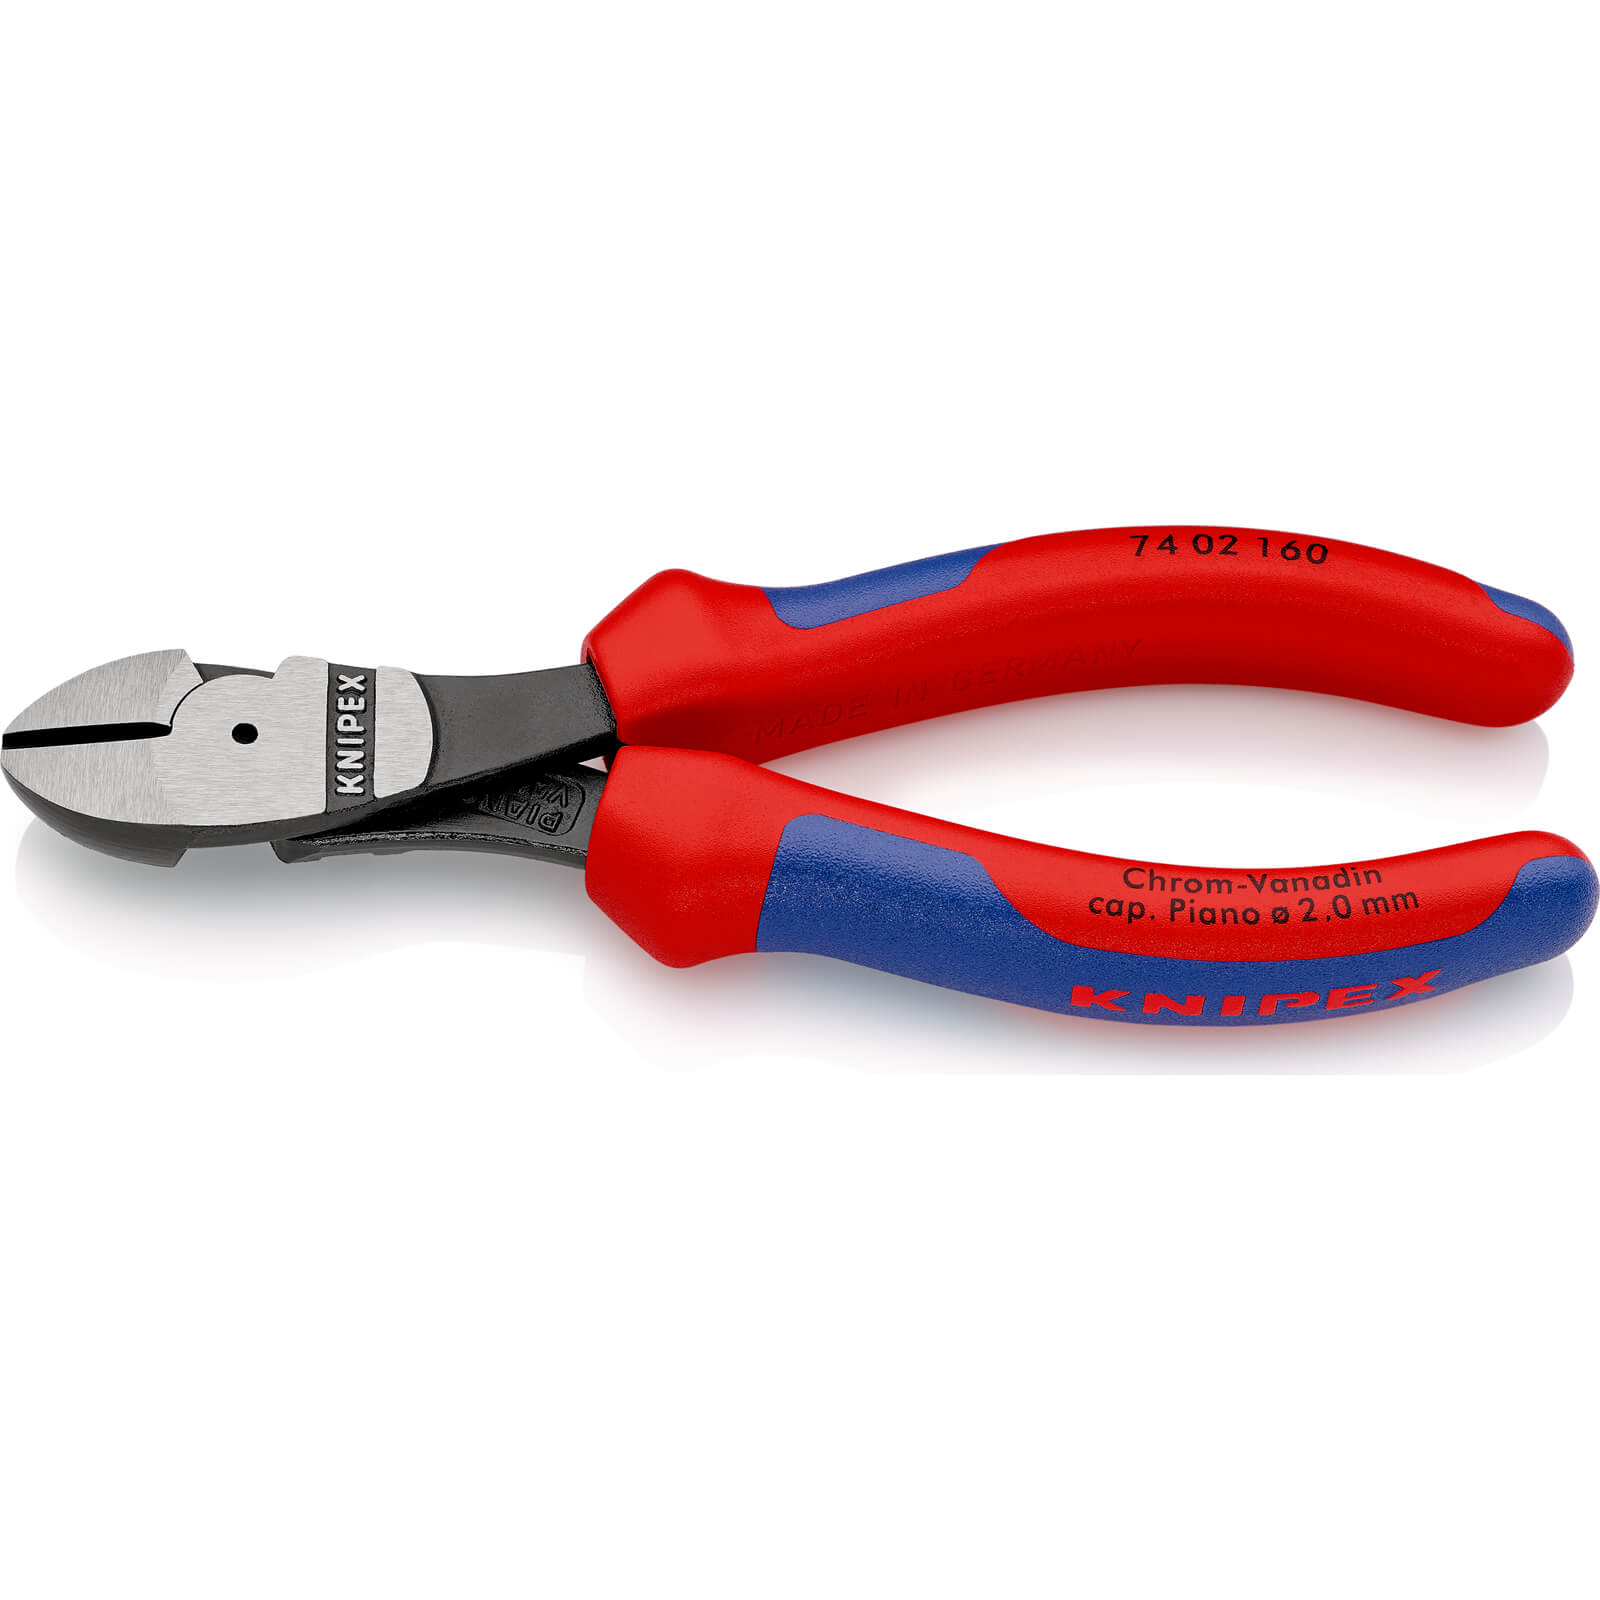 Photo of Knipex 74 02 Diagonal Cutting Pliers 160mm